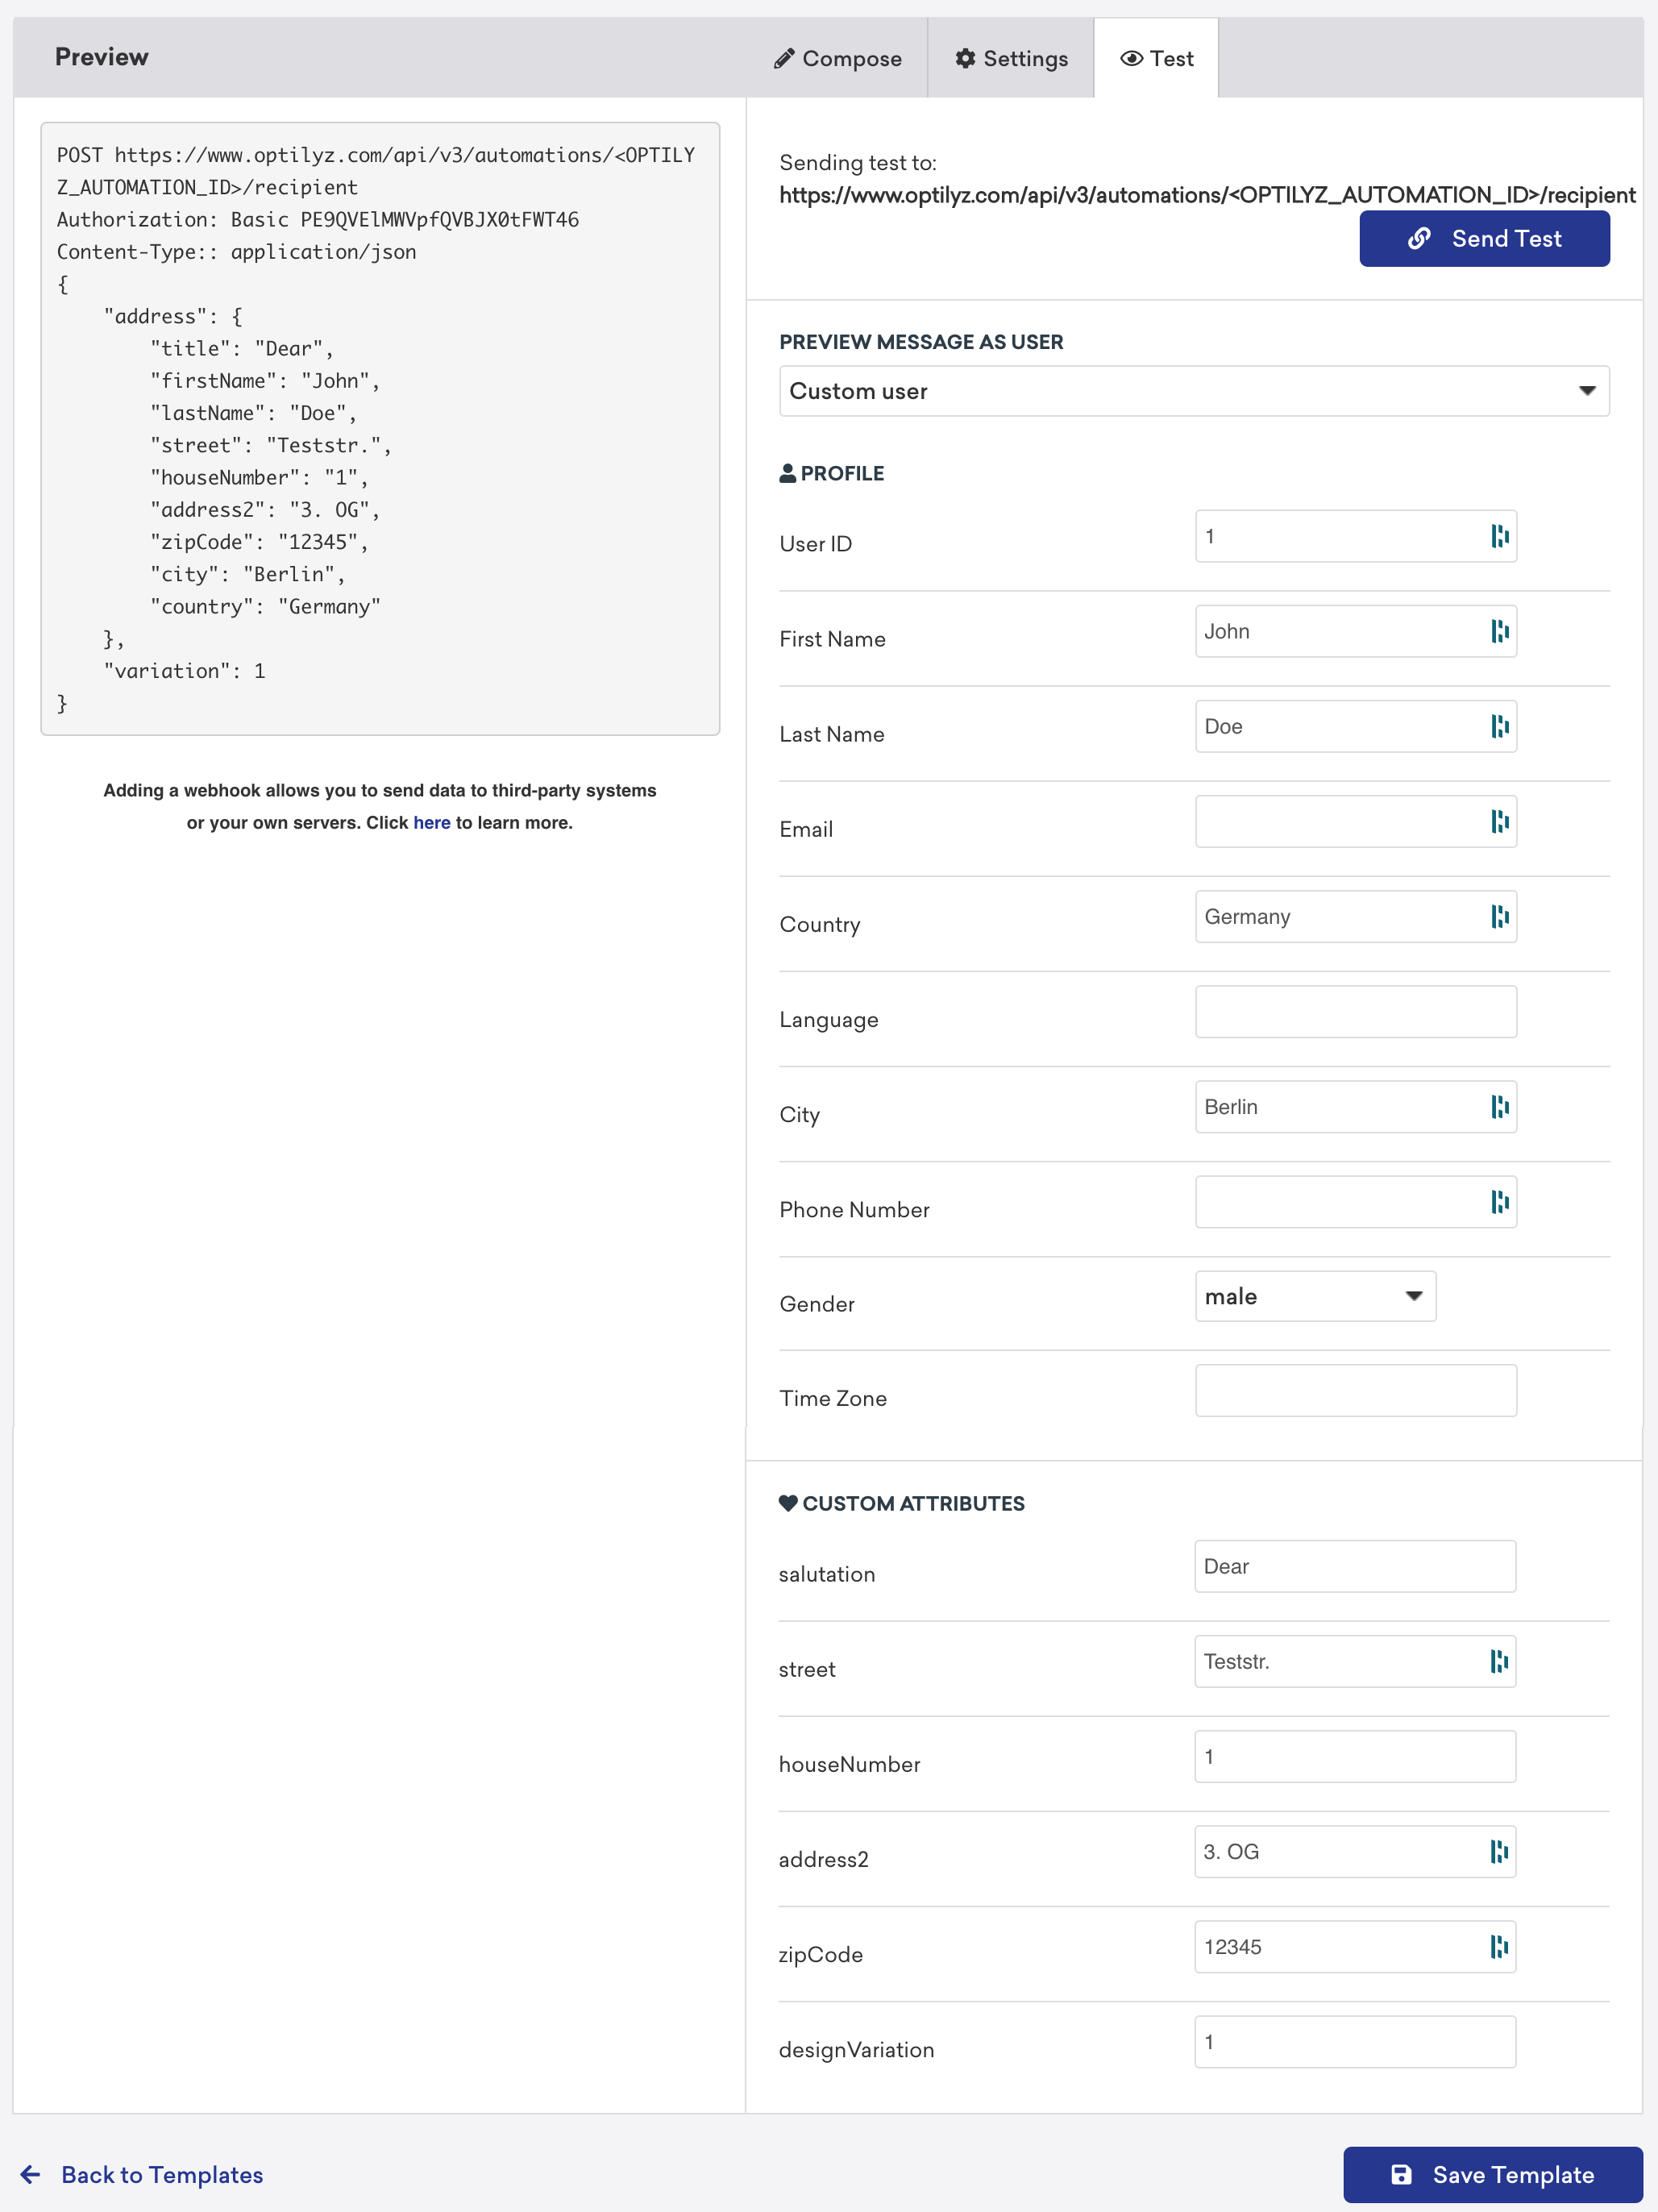 Different testing fields available in the test tab of the Braze webhook builder.